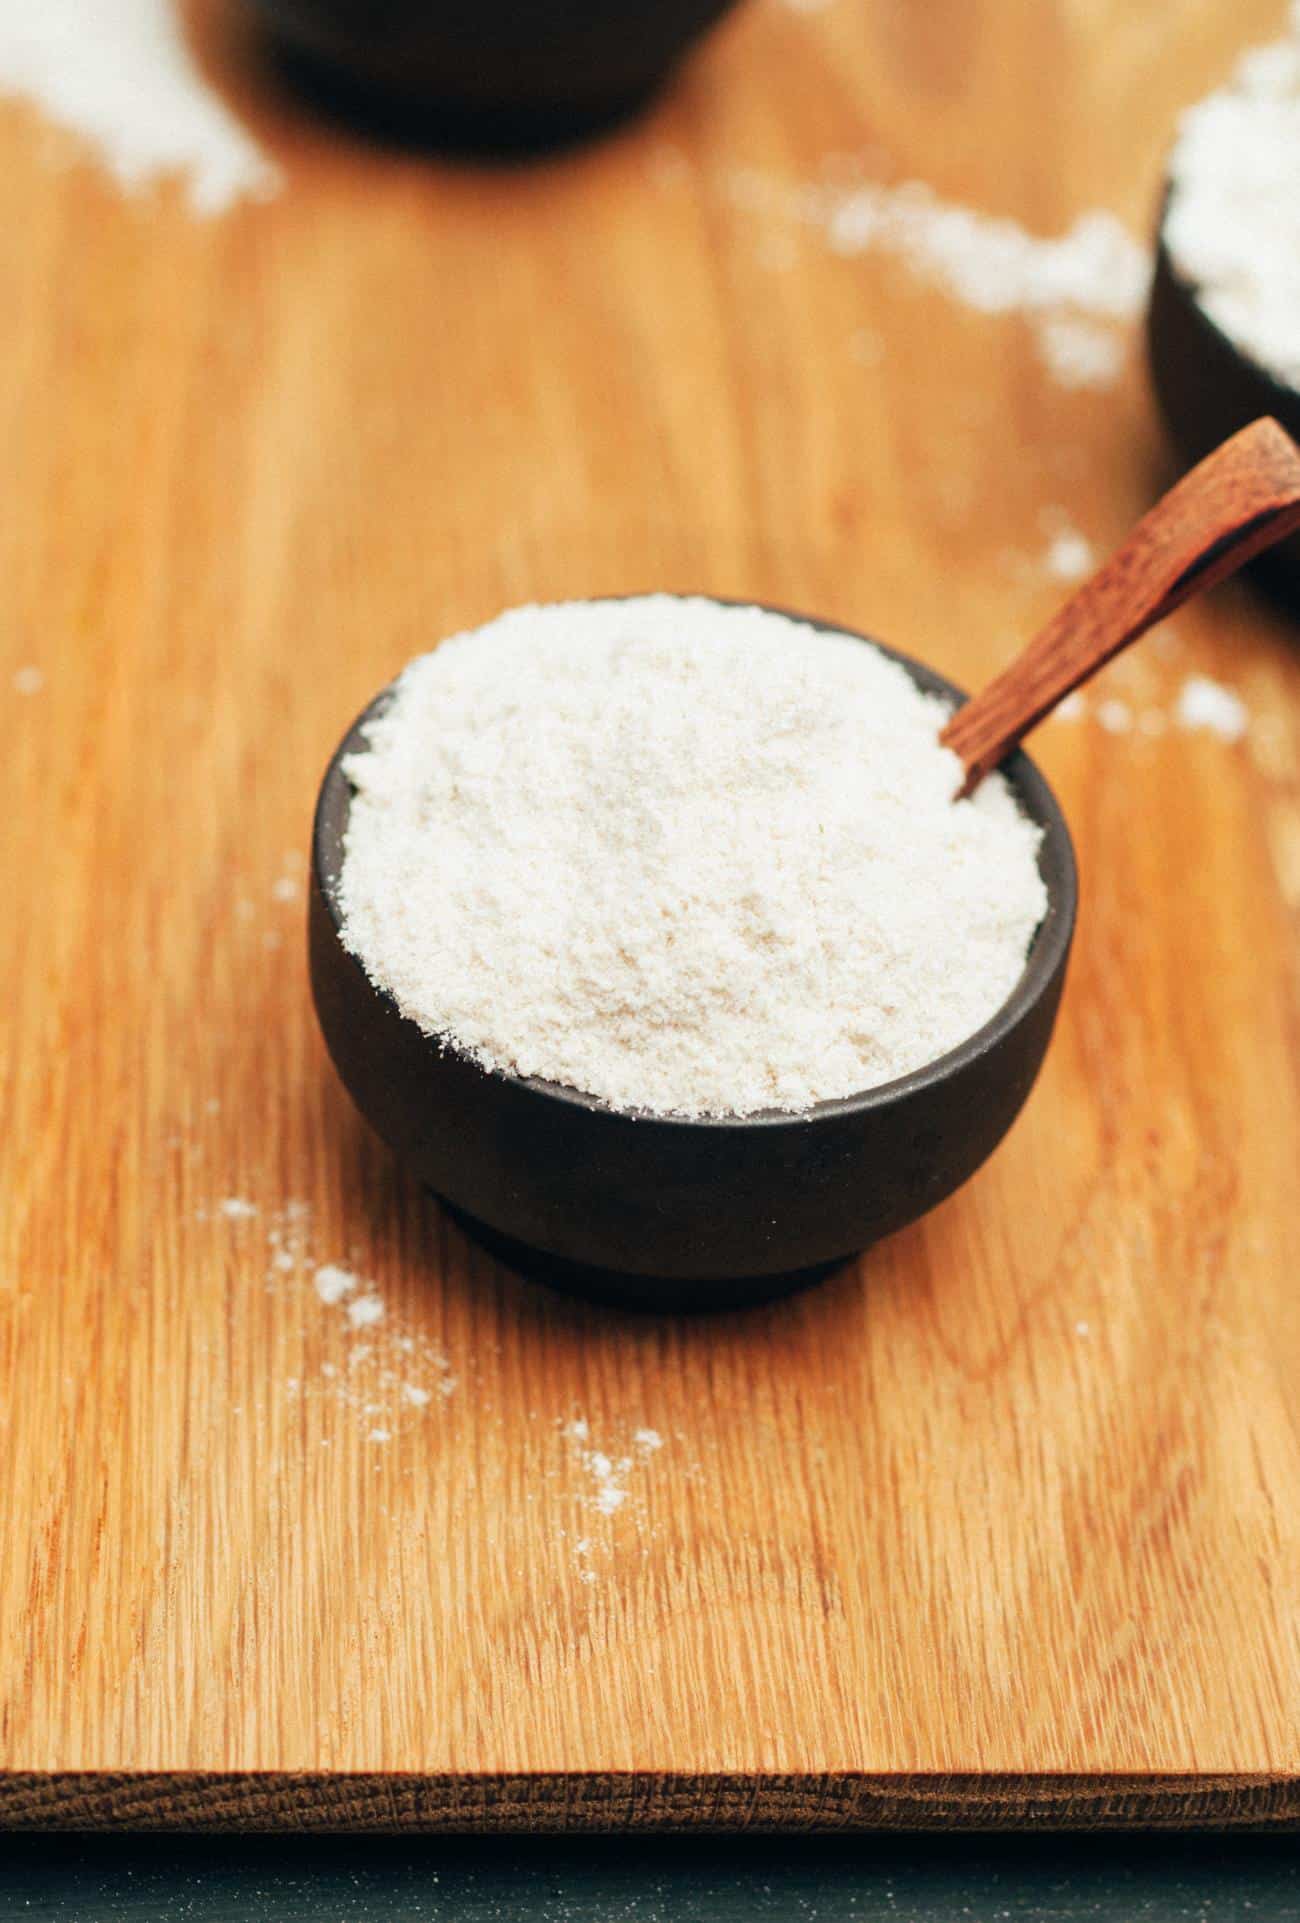 DIY gluten free flour mix recipe with only 3 ingredients ready in 5 minutes